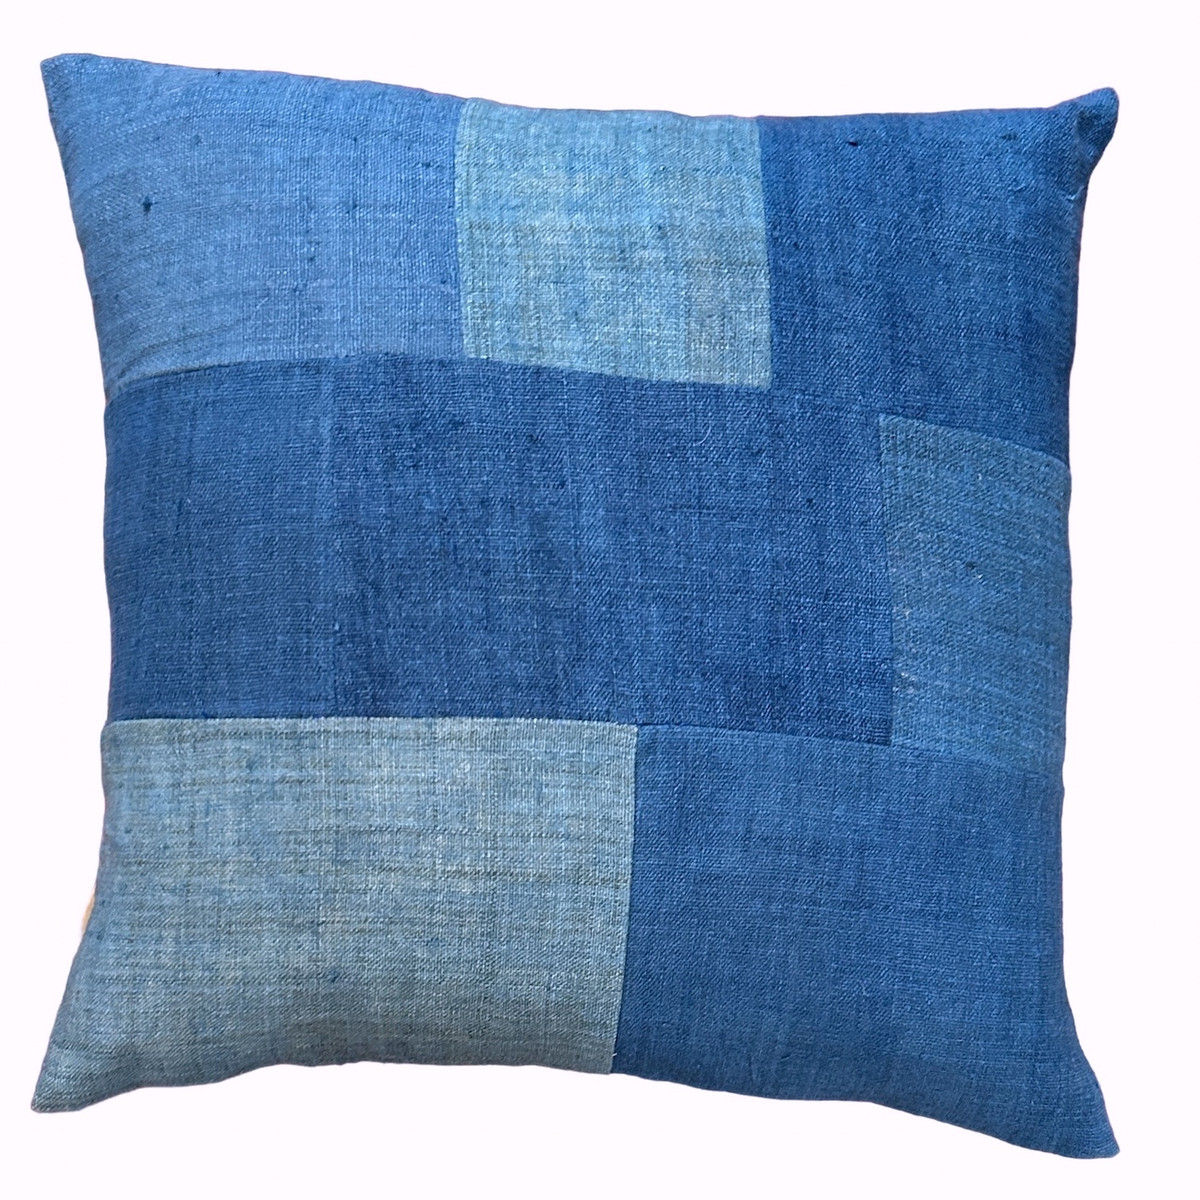 Handwoven and handspun indigo dyed hemp pillow. The pillow front is pieced with different colors of indigo dyed fabrics. The back is deep indigo blue hemp cloth.  90/10 feather down insert, zippered back. 